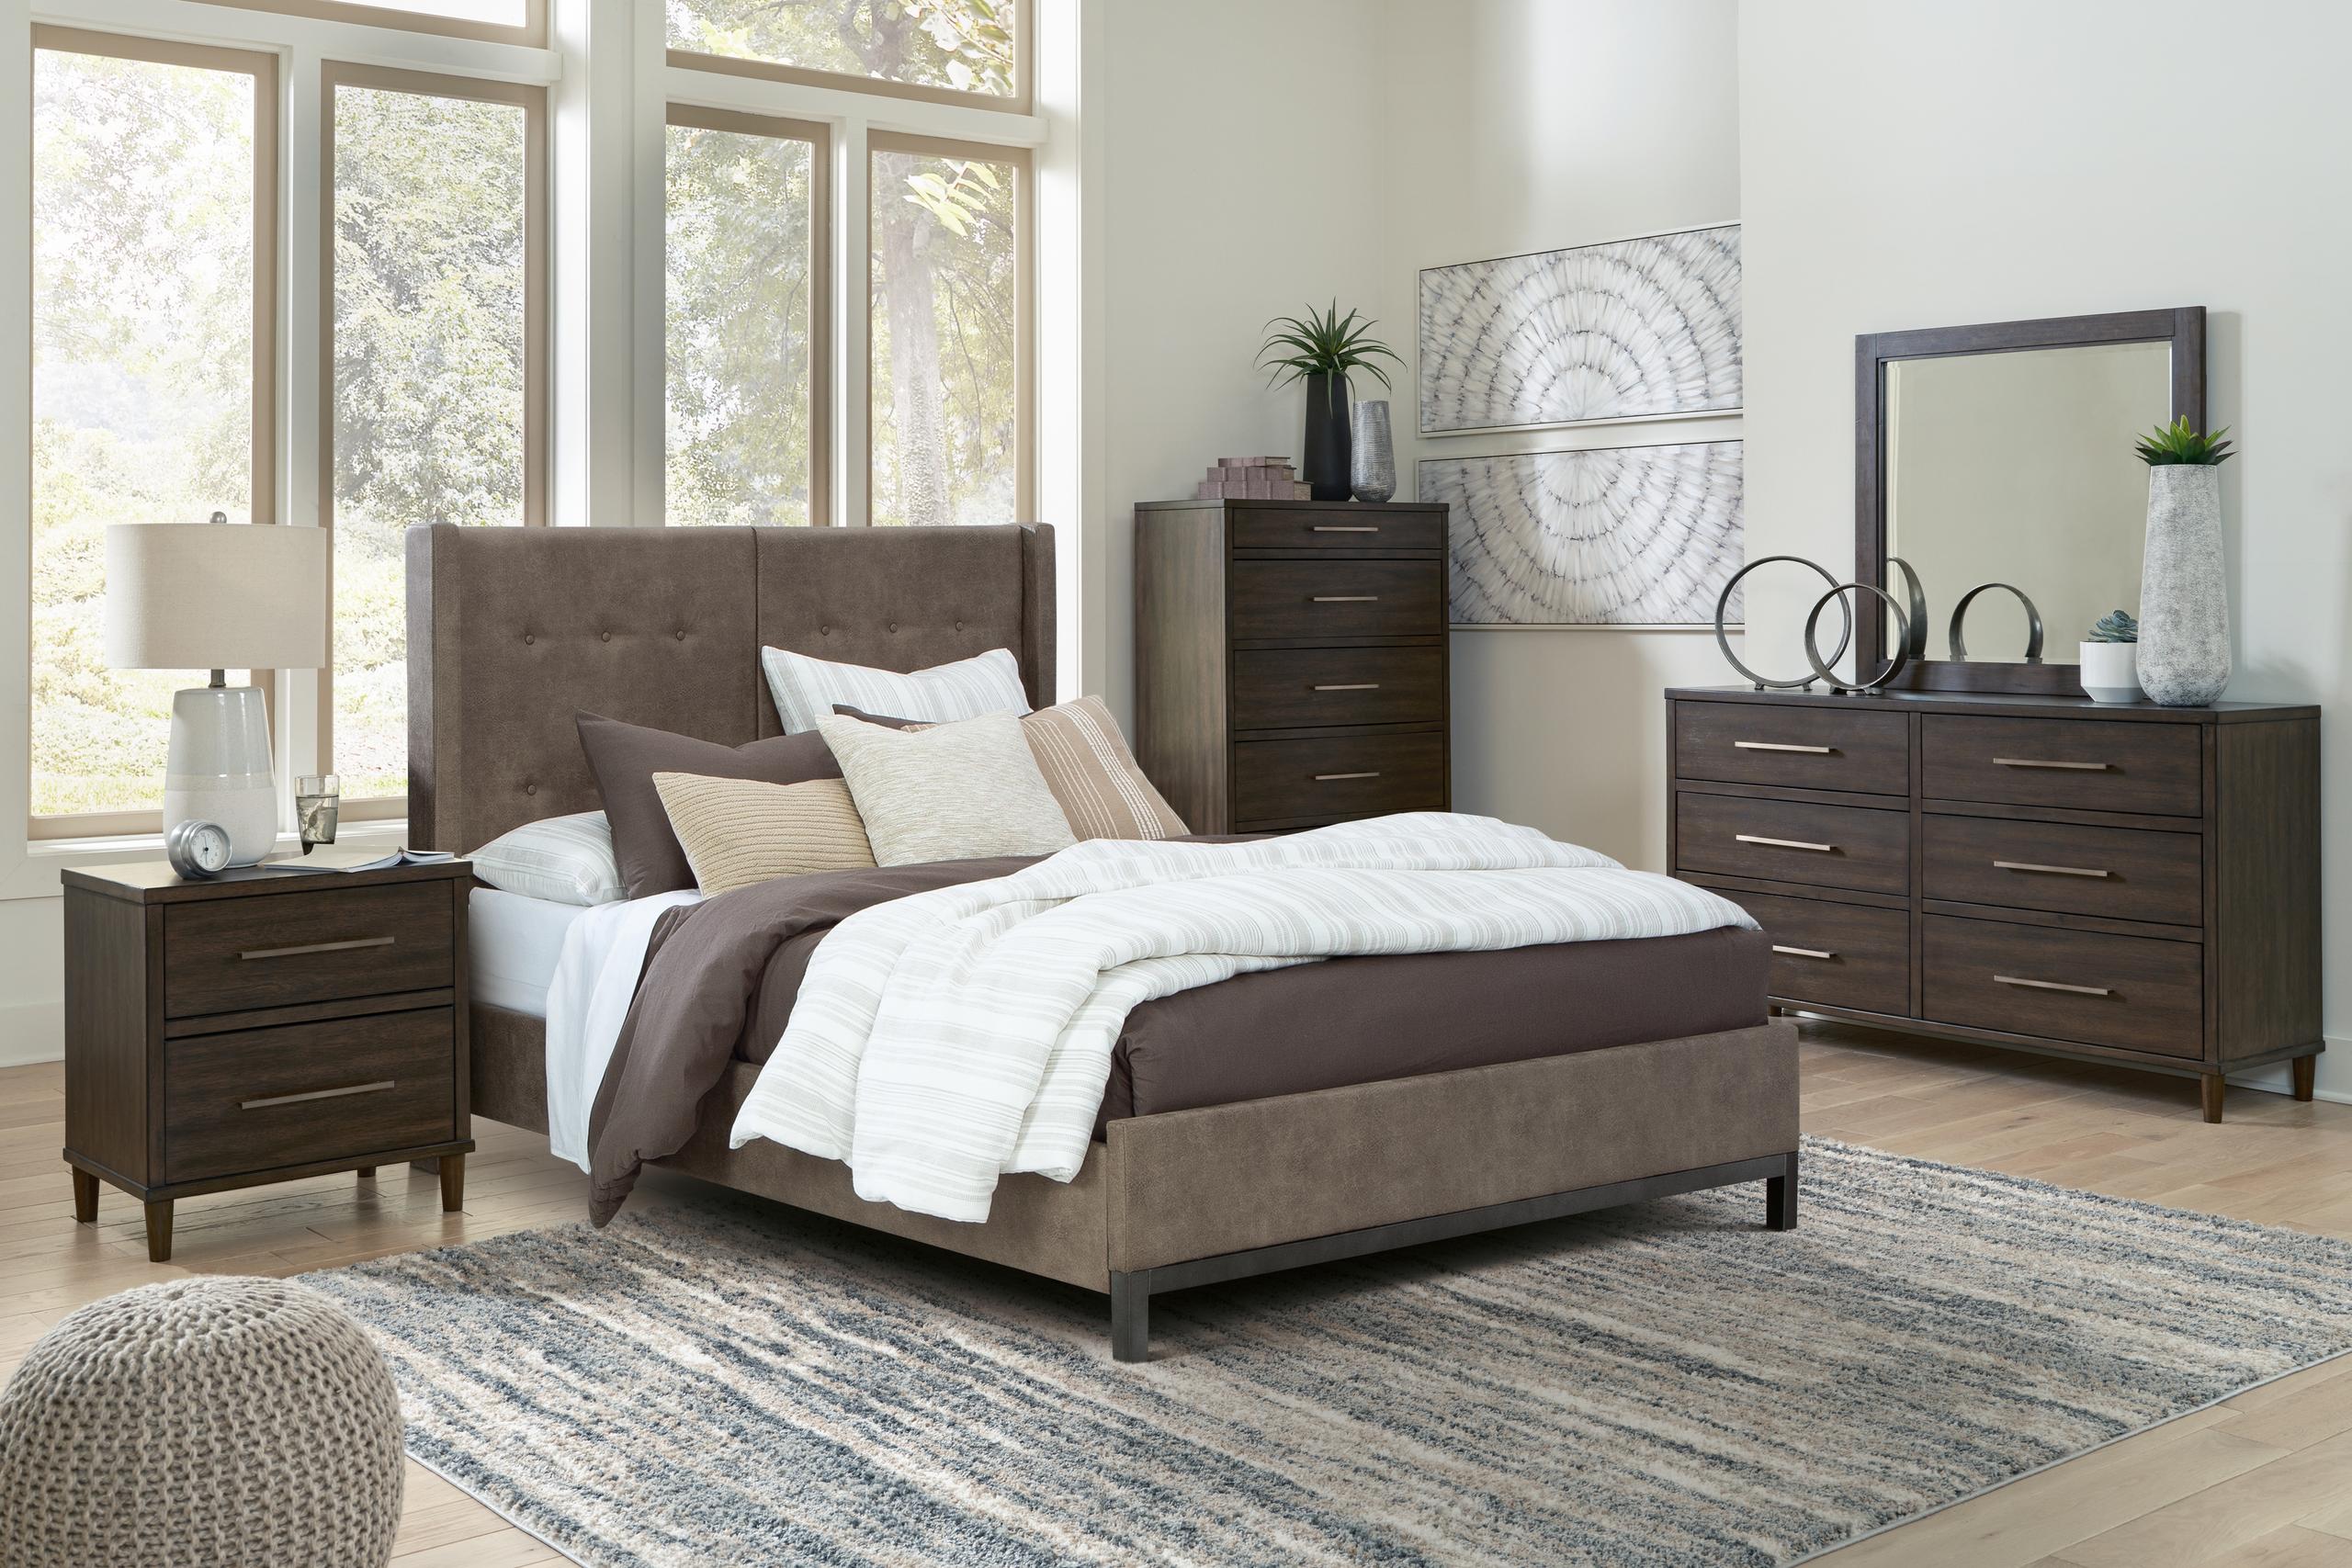 ASHLEY FURNITURE B374B6 Wittland Queen Upholstered Panel Bed